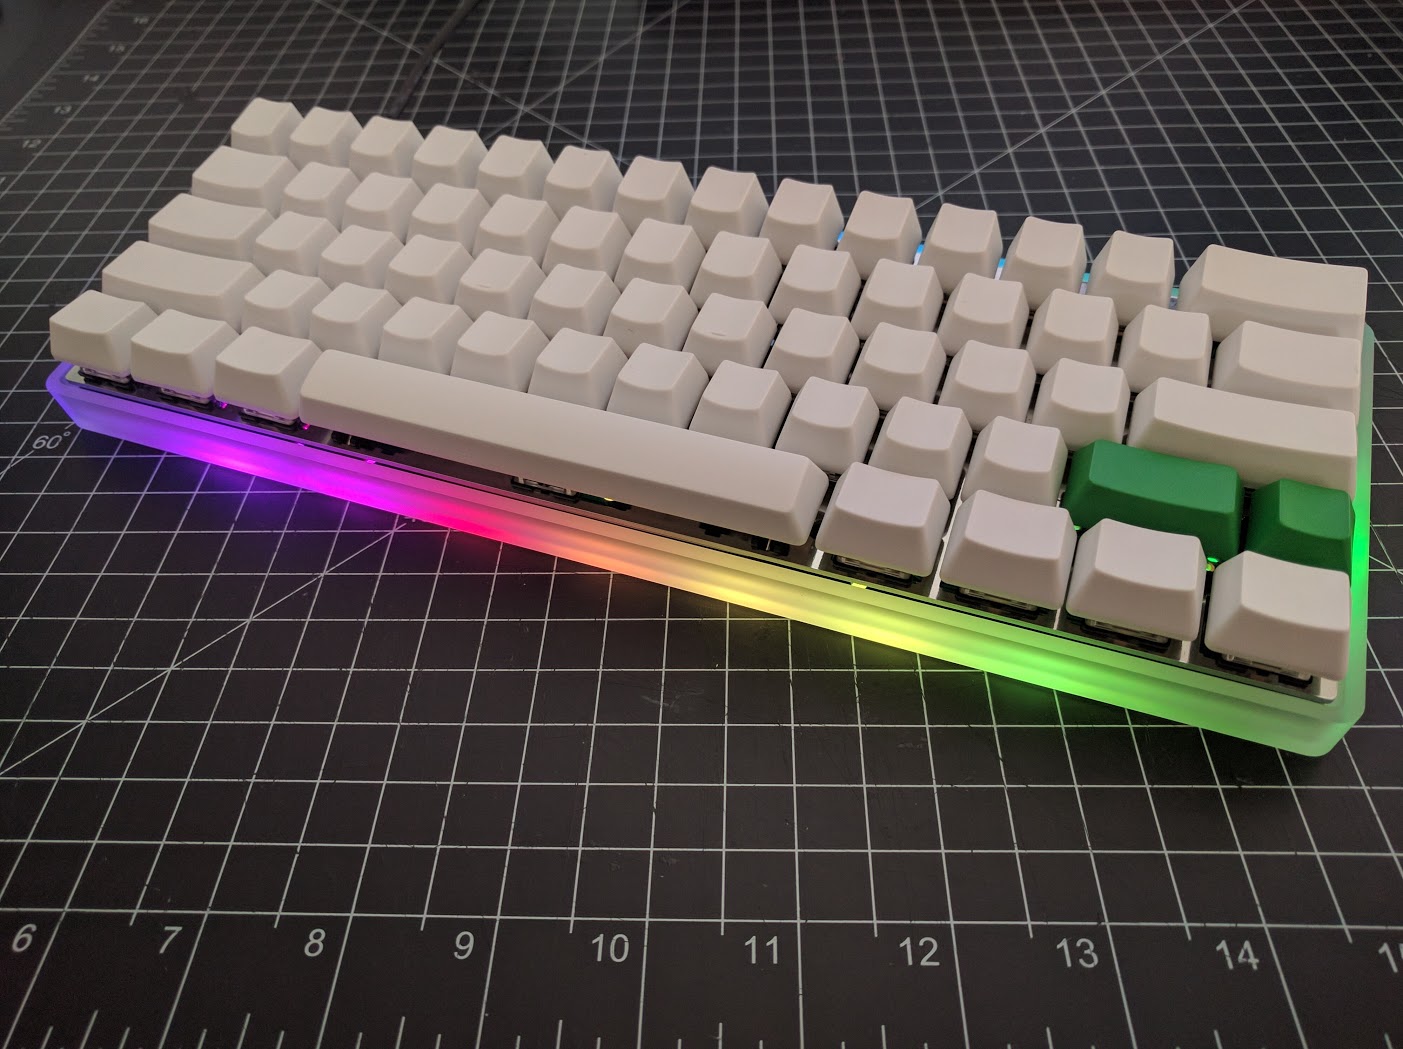 Image of KC60 with RGB Underglow